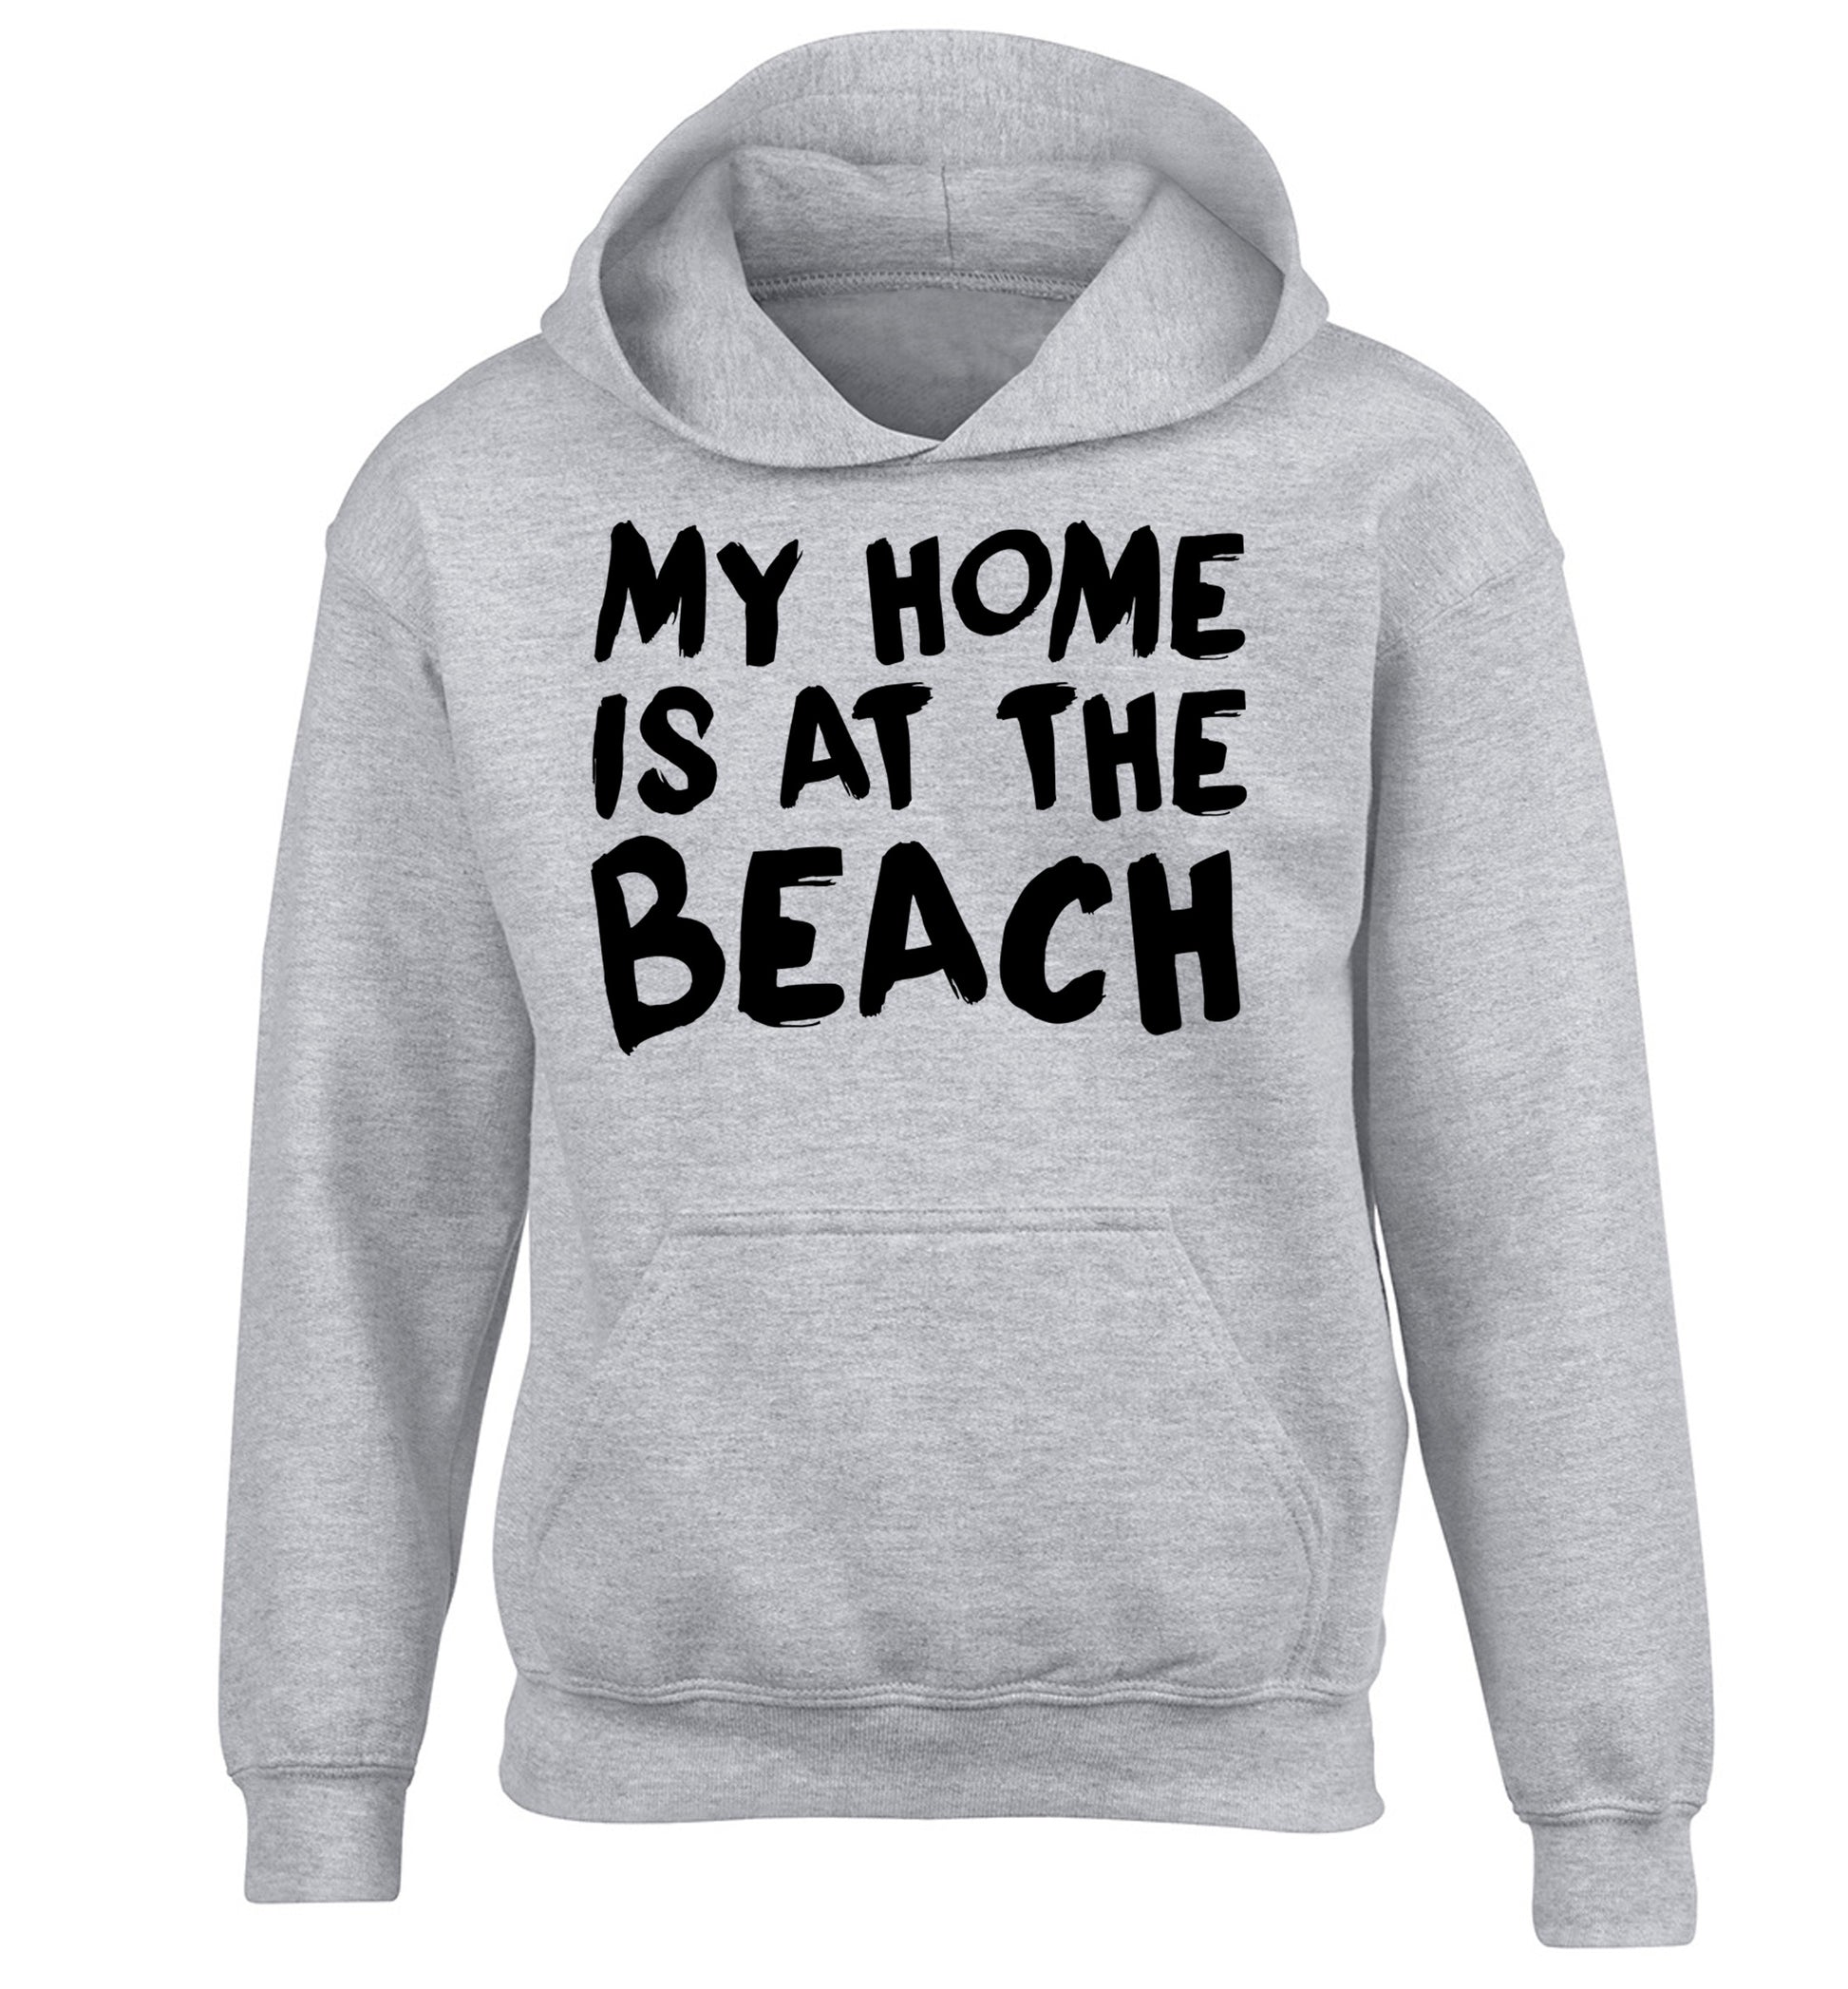 My home is at the beach children's grey hoodie 12-14 Years